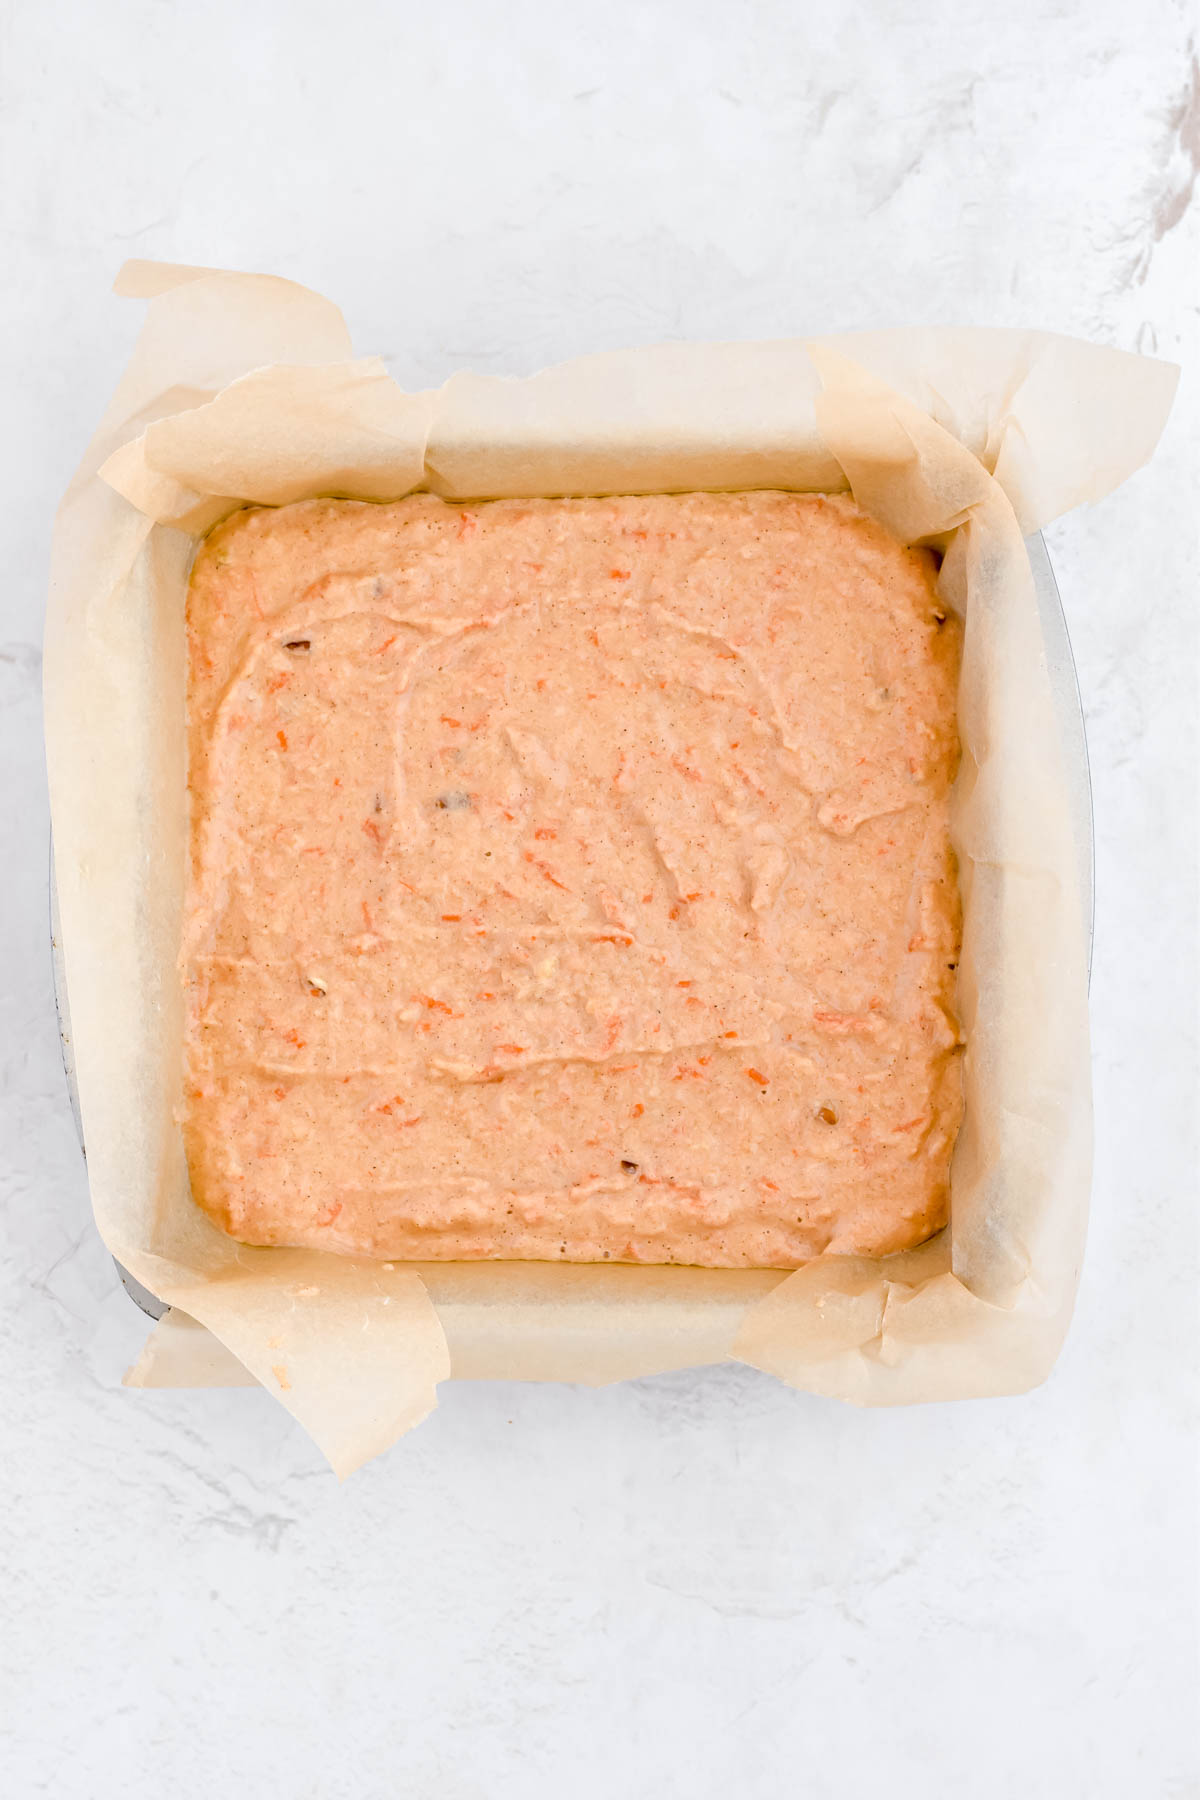 healthier carrot cake bars batter in a 9x9 pan before baking.